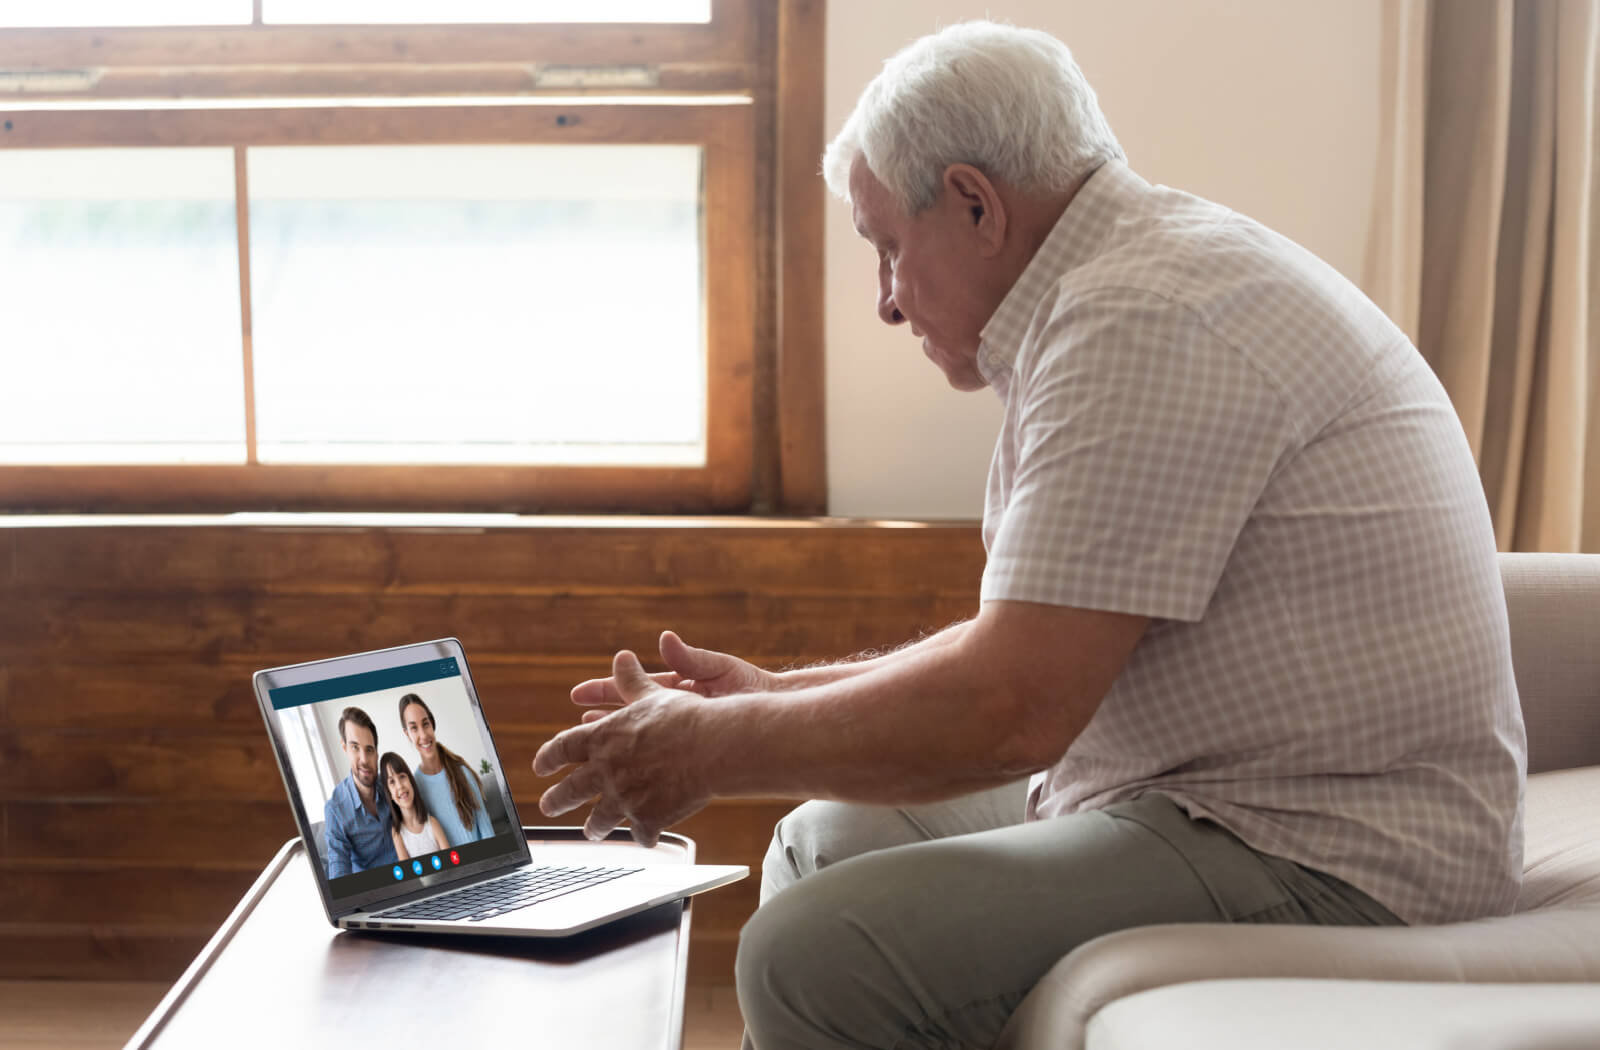 An older adult man on a video call with his family.